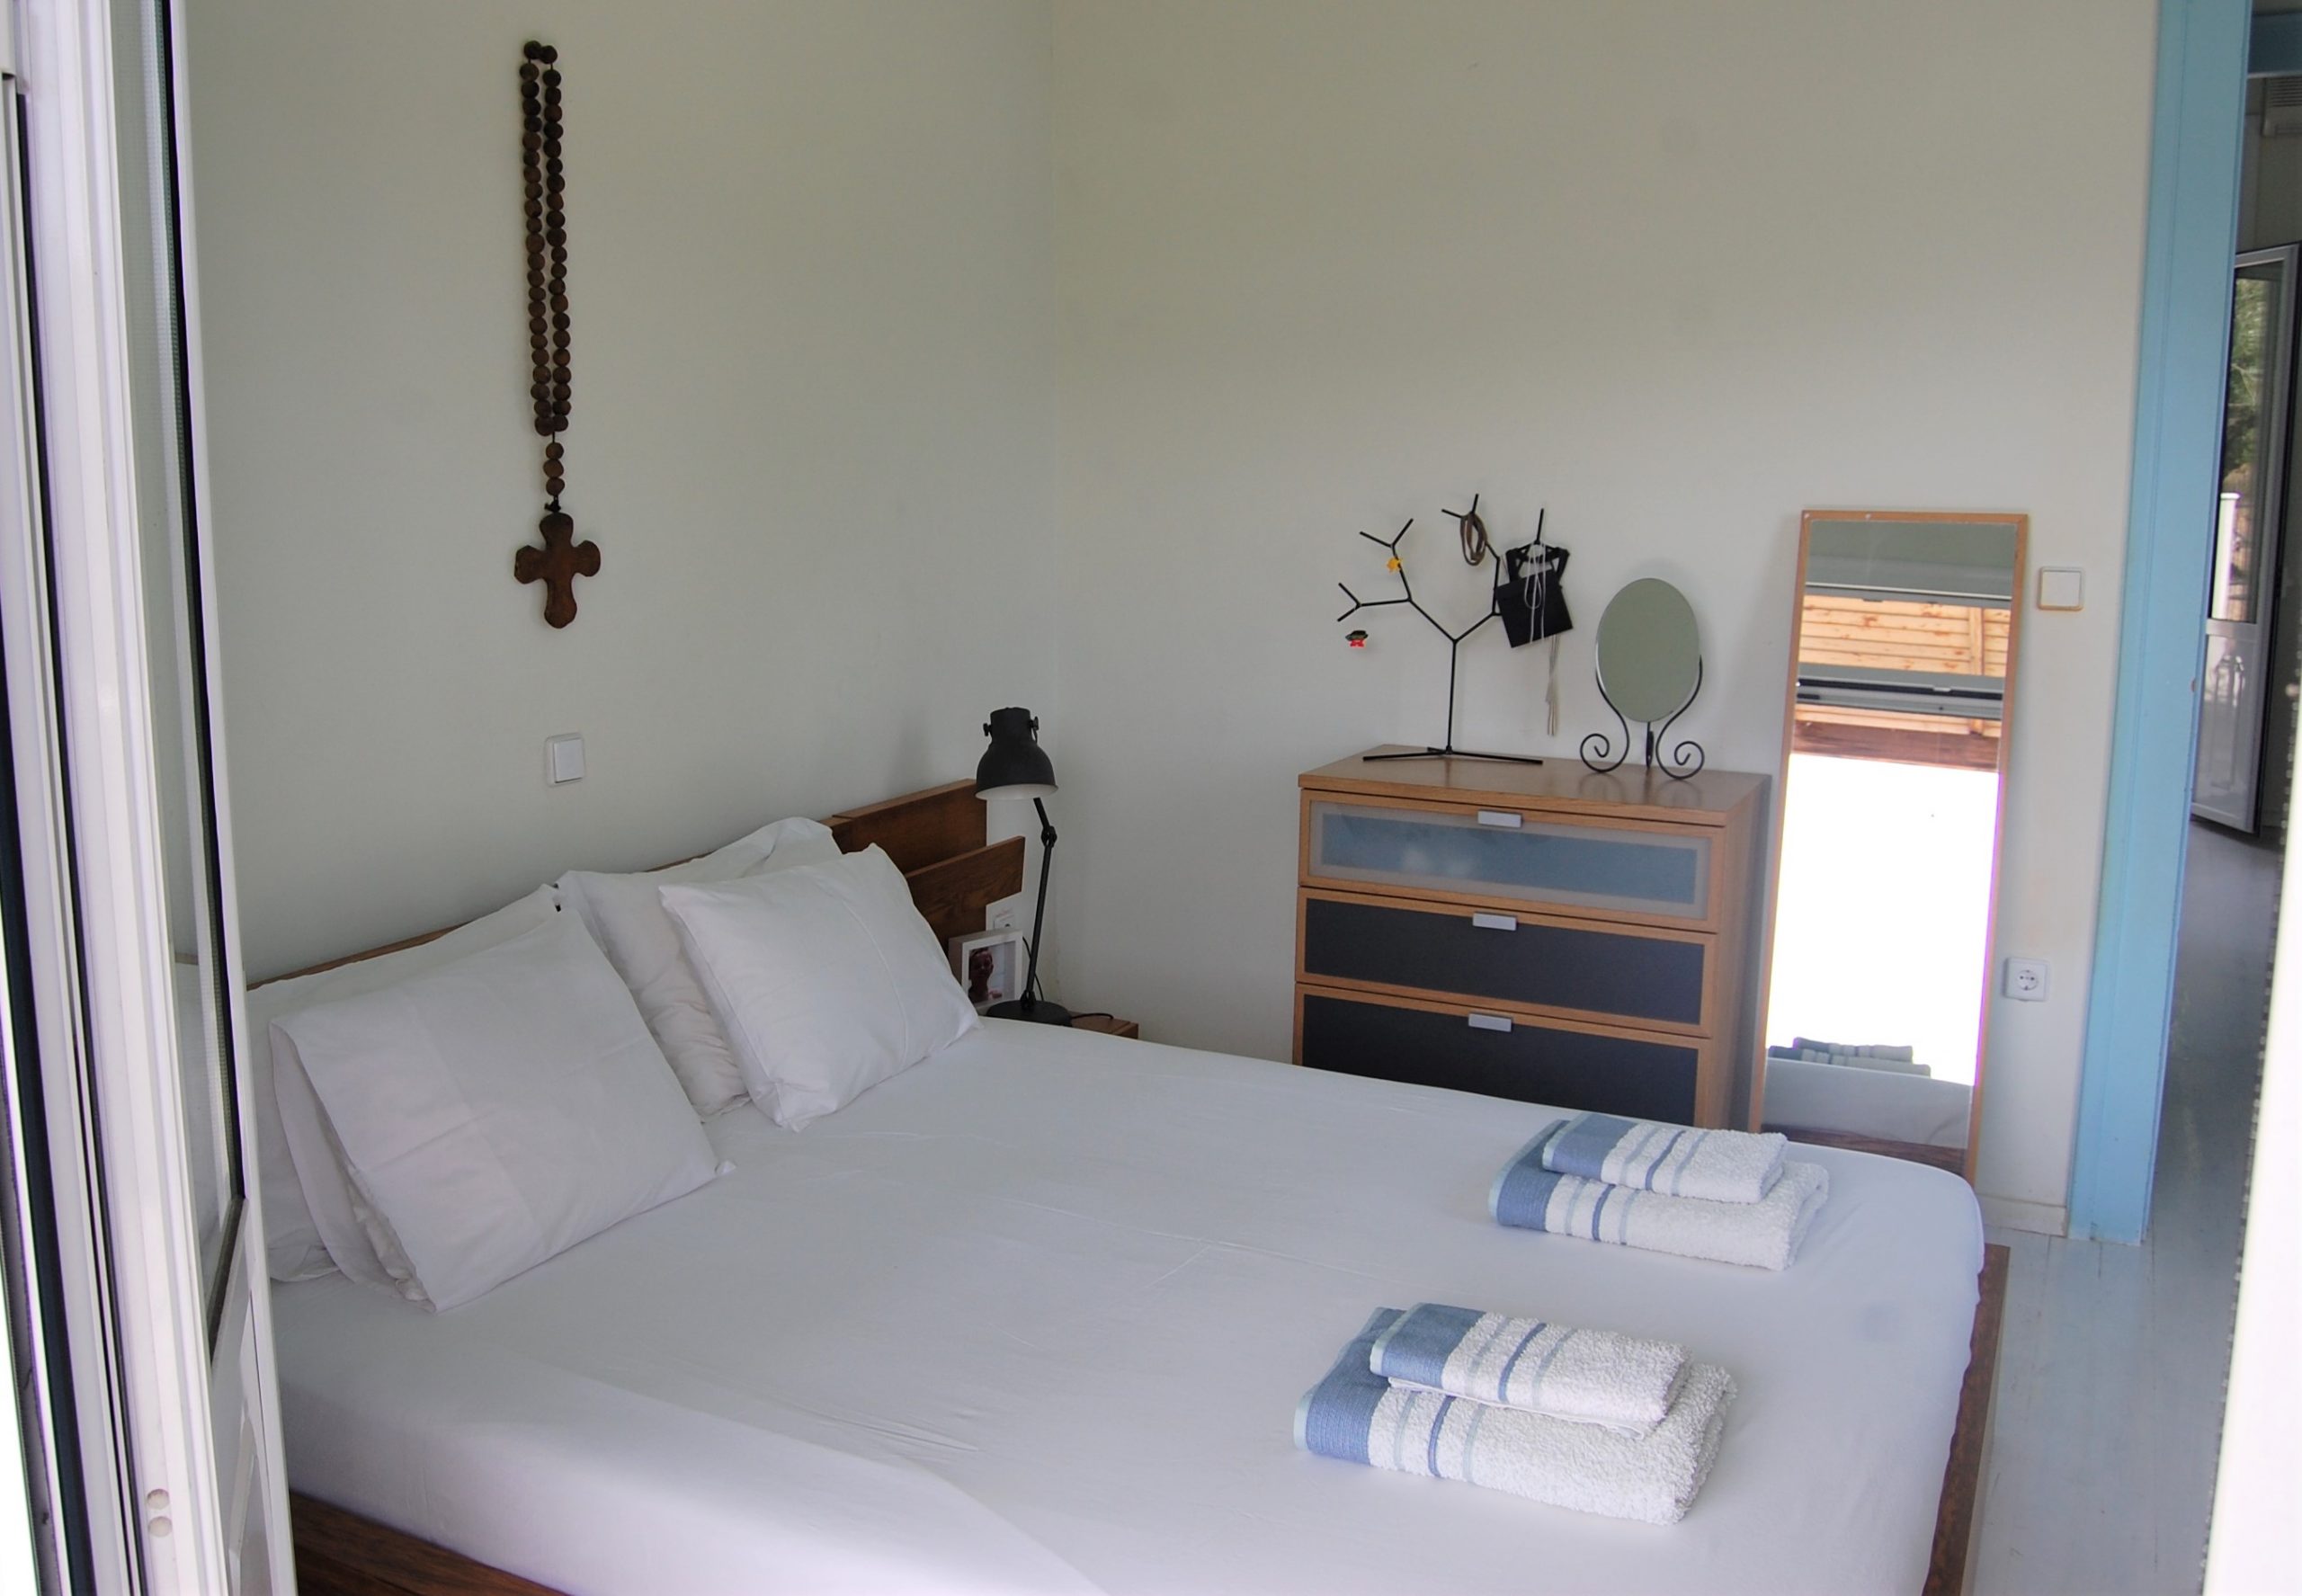 Bedroom of holiday house for rent on Ithaca Greece, Kolleri